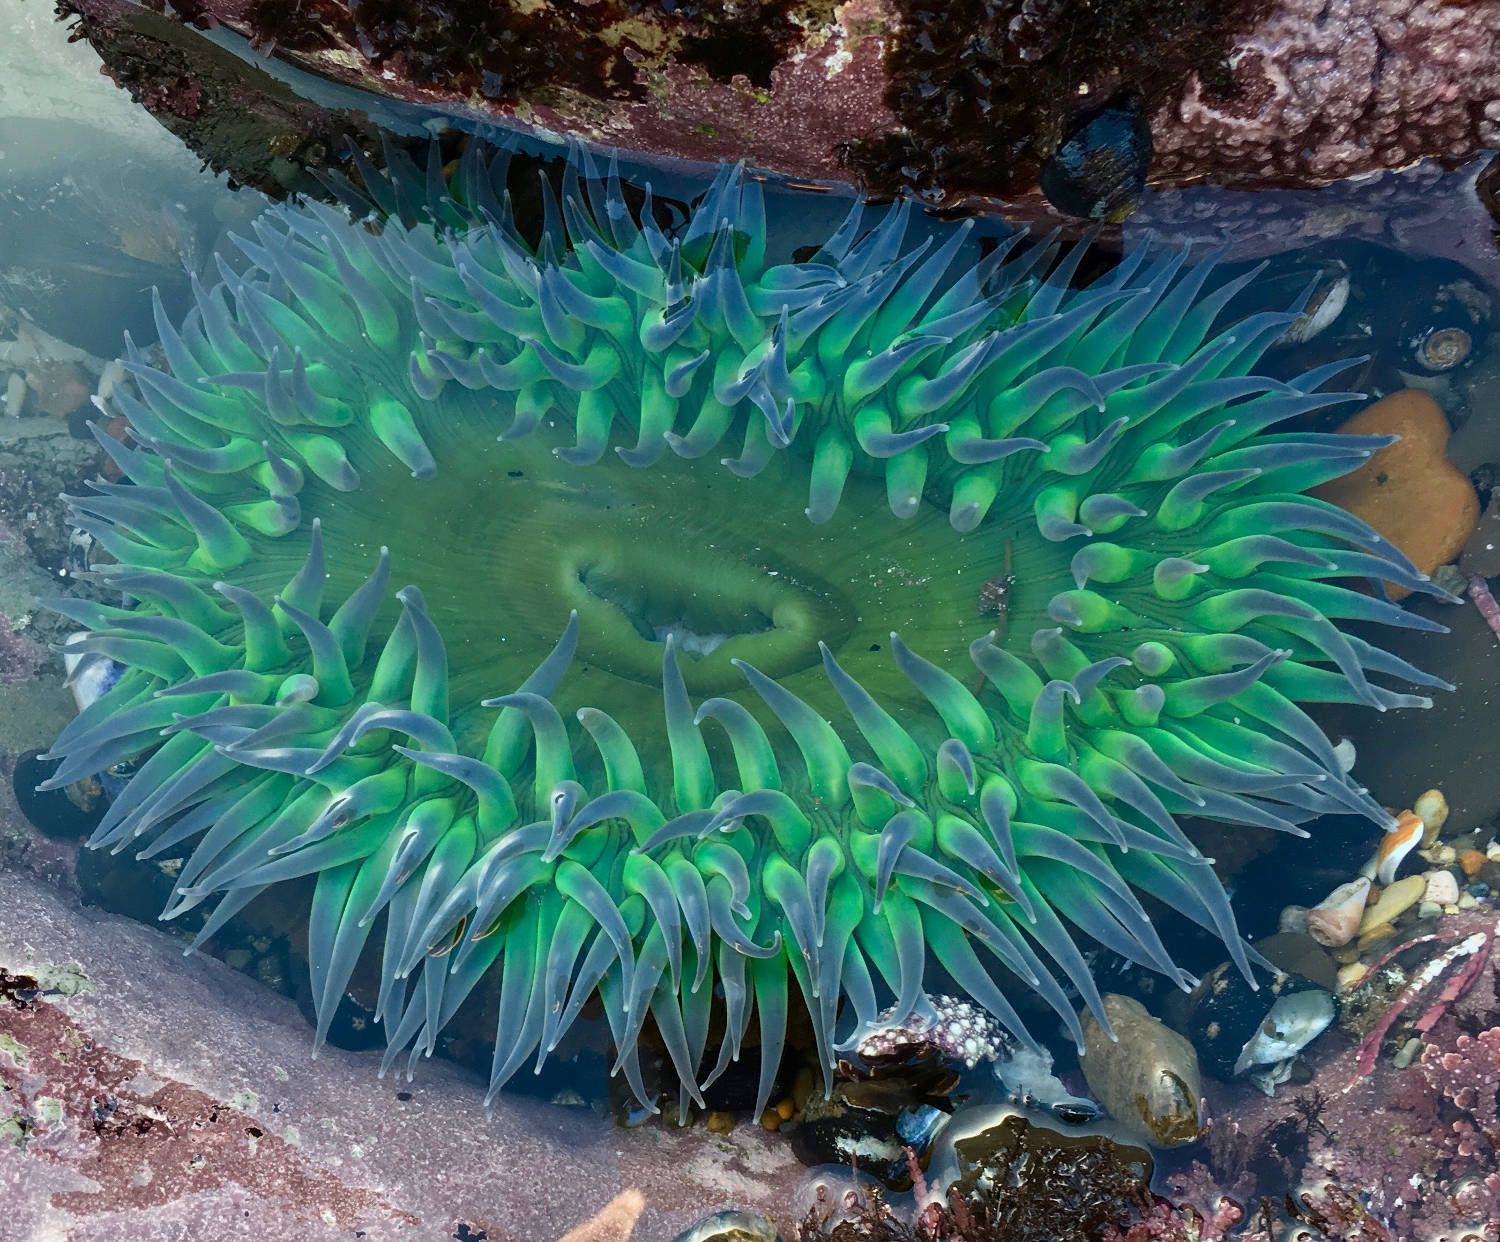 One of the thousands of huge anemones in the tide pools